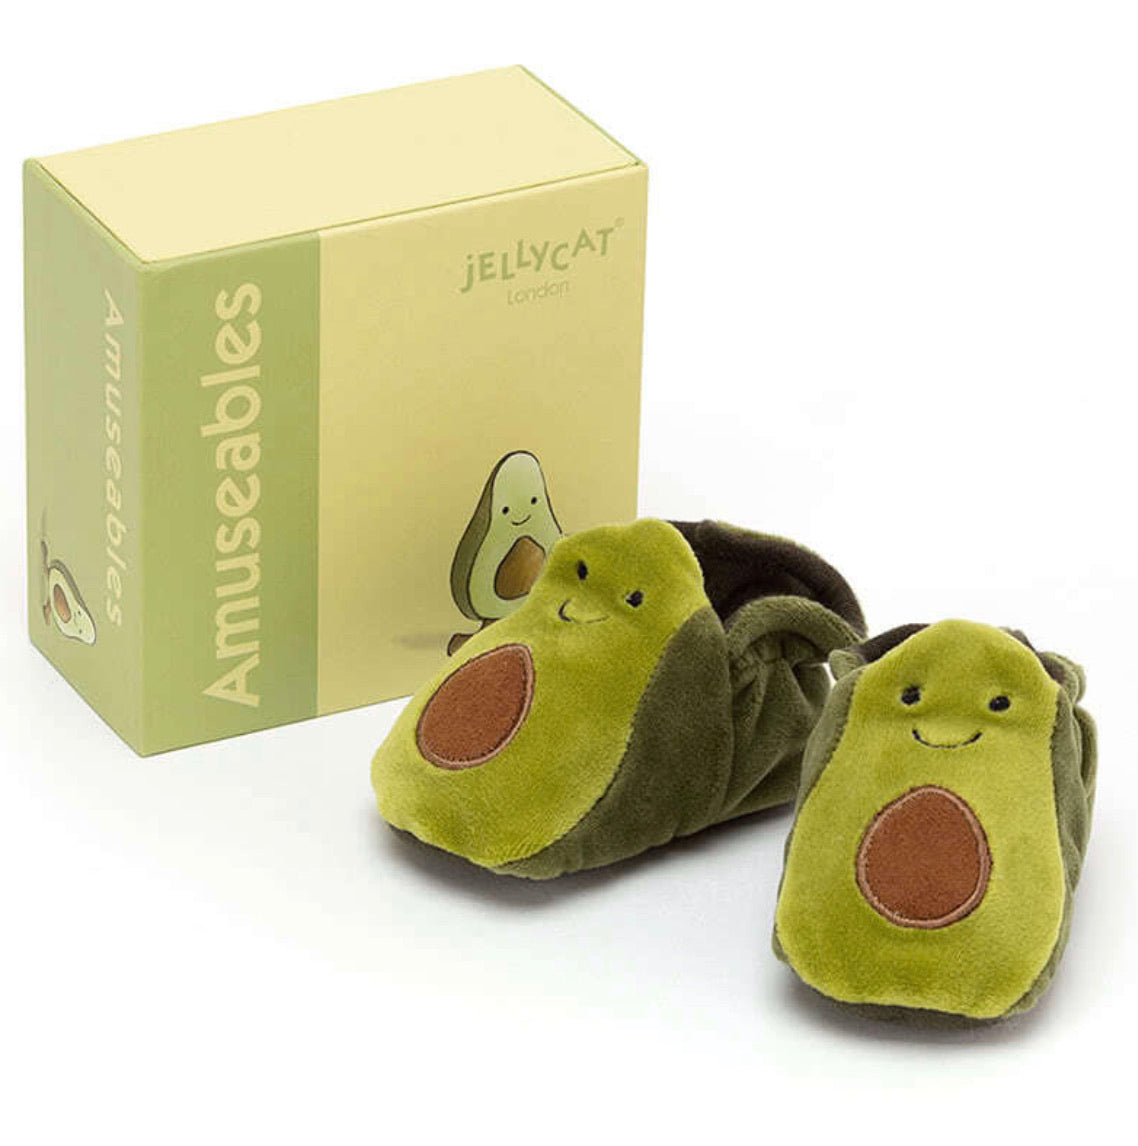 Amuseable Avocado Booties 0-6 months